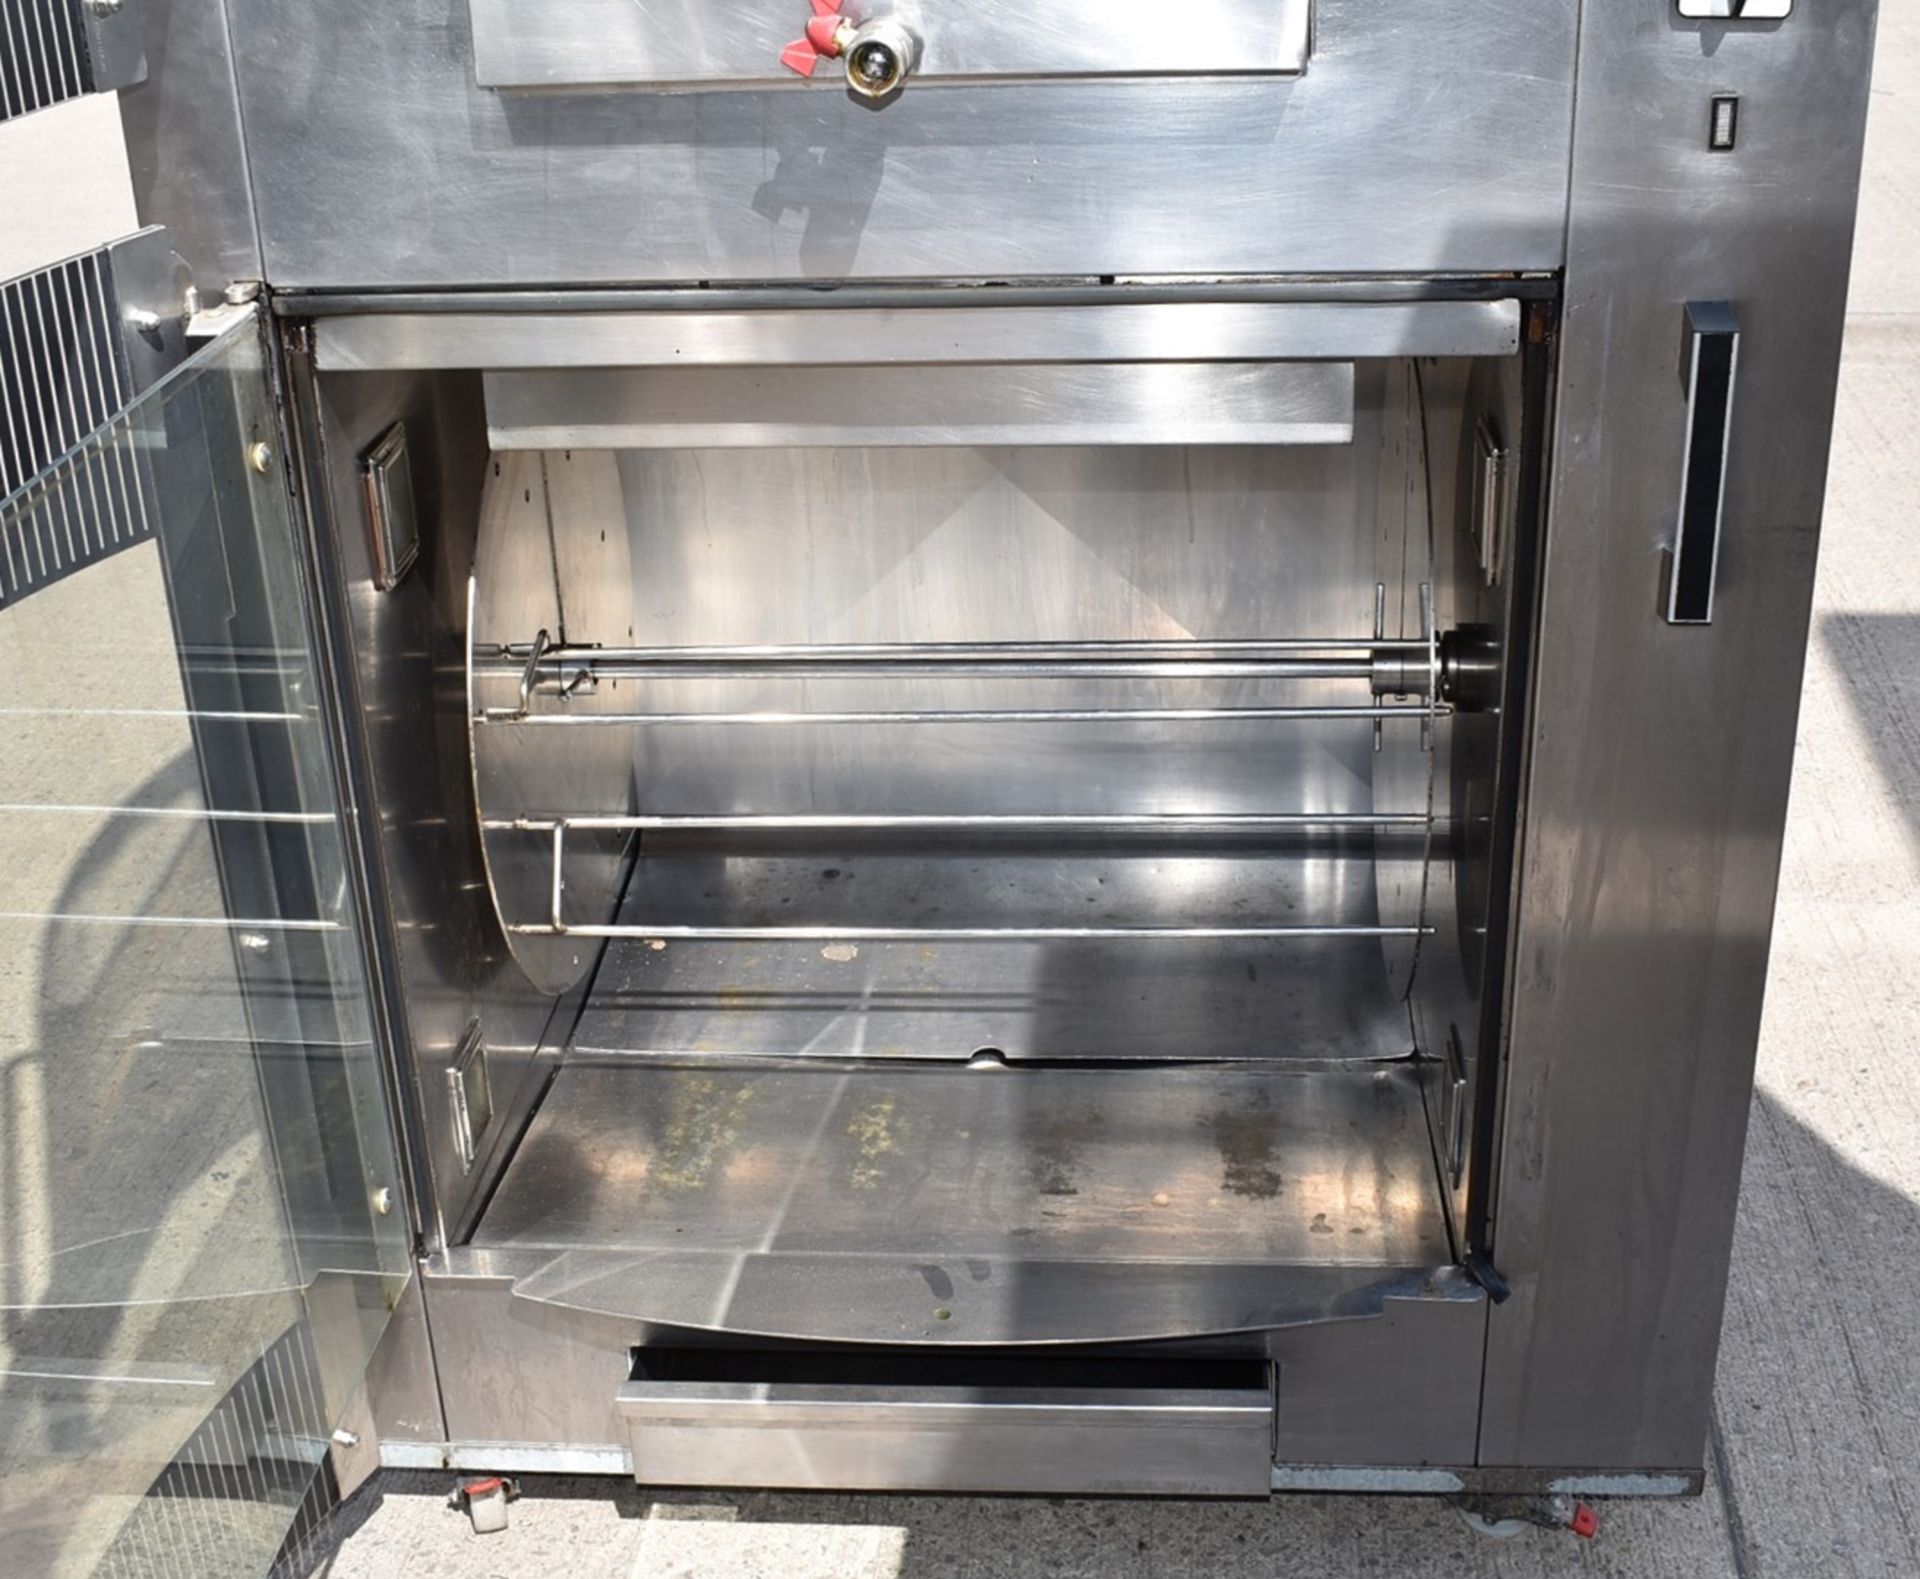 1 x BKI BBQ King Commercial Double Rotisserie Chicken Oven With Stand - Type VGUK16 - 3 Phase - Image 13 of 21